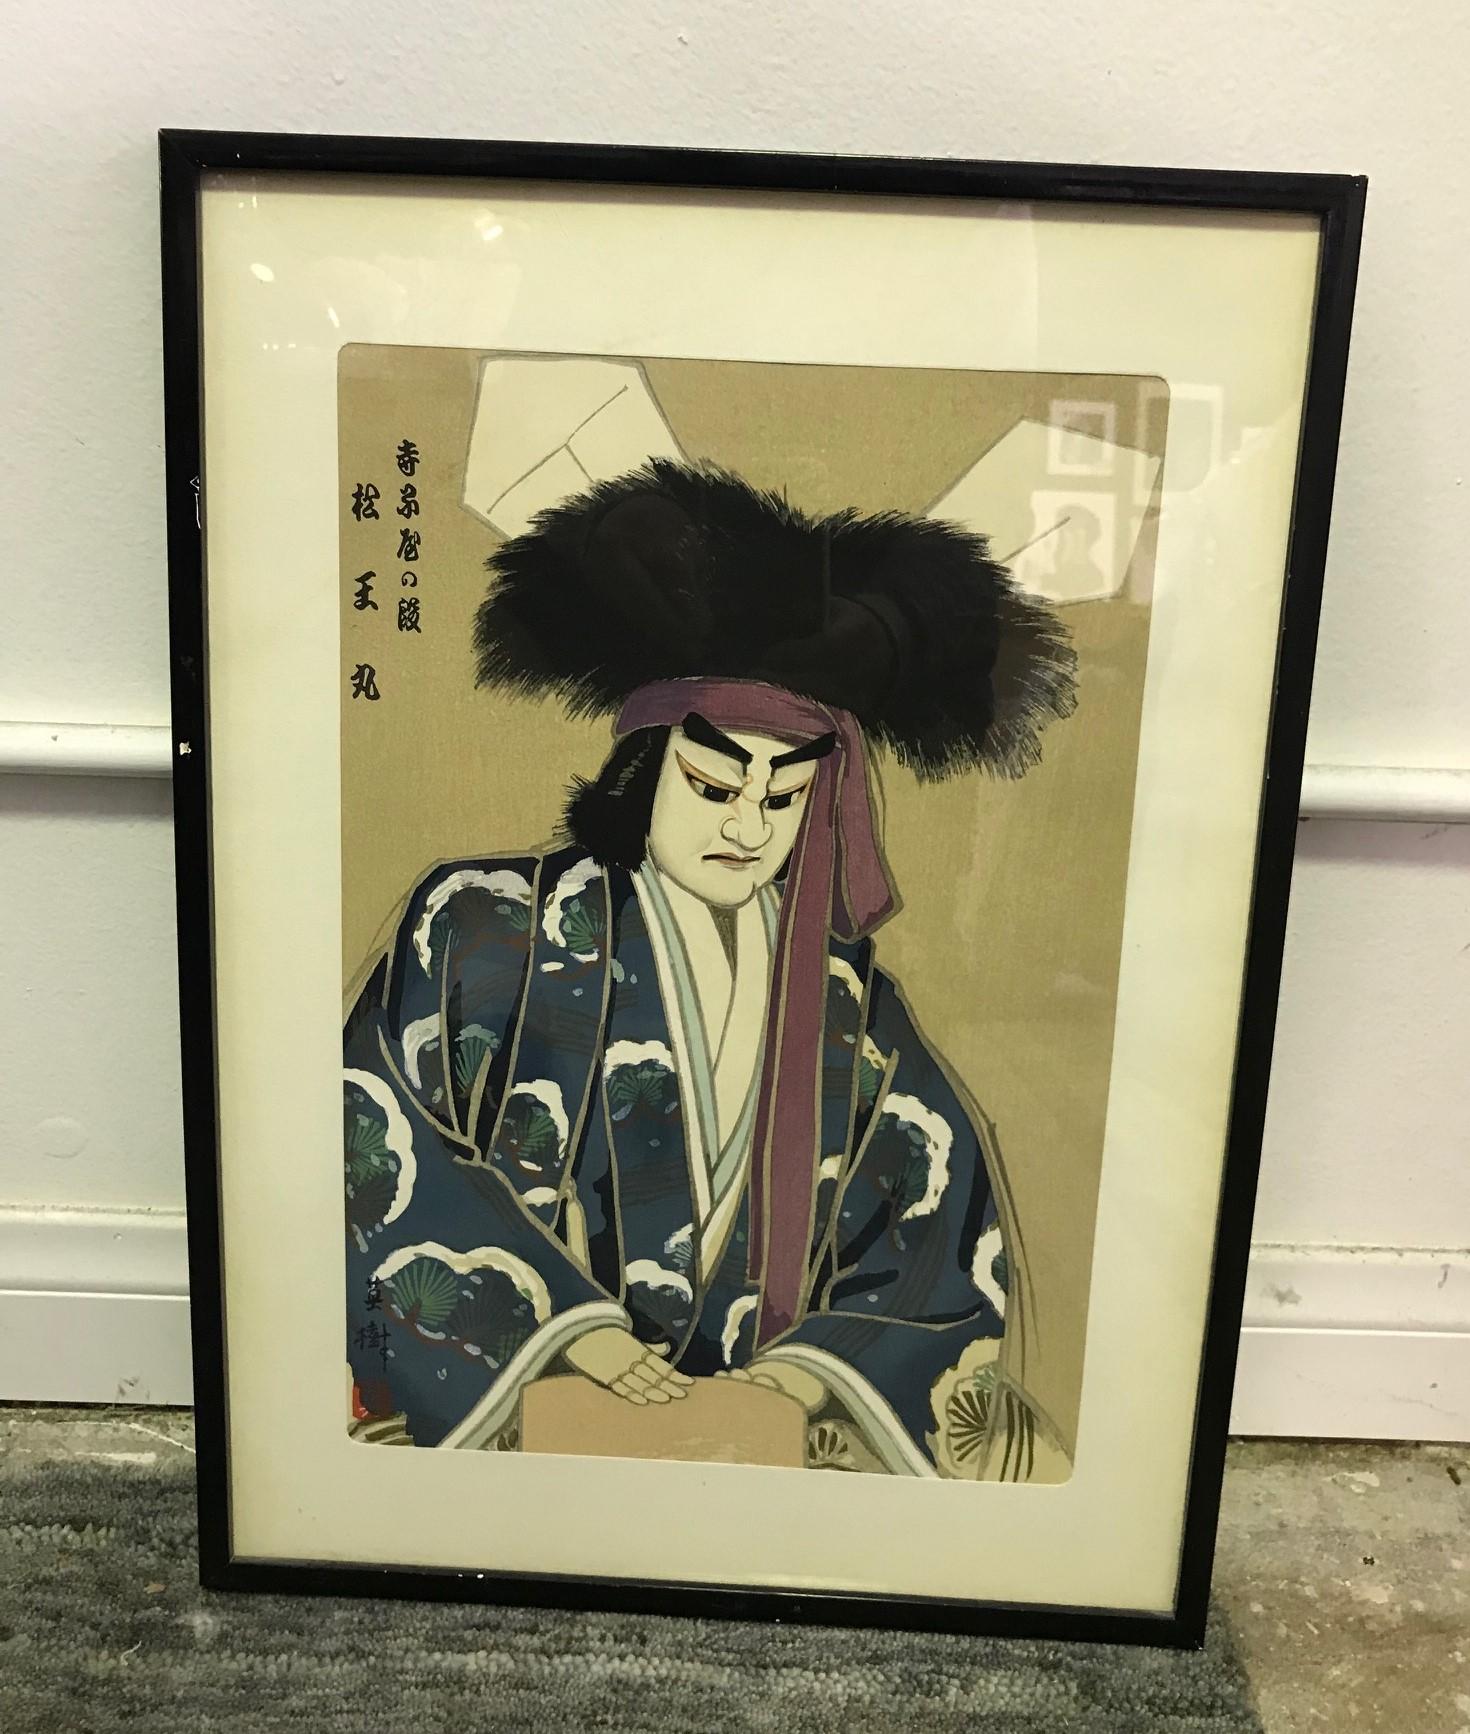 A somewhat rare and hard-to-find image by Japanese artist Masaoka Konobu Hasegawa (though we have also seen this image attributed to artist Hideki Hanafusa but we think this was in error) of a male Bunraku puppet titled 